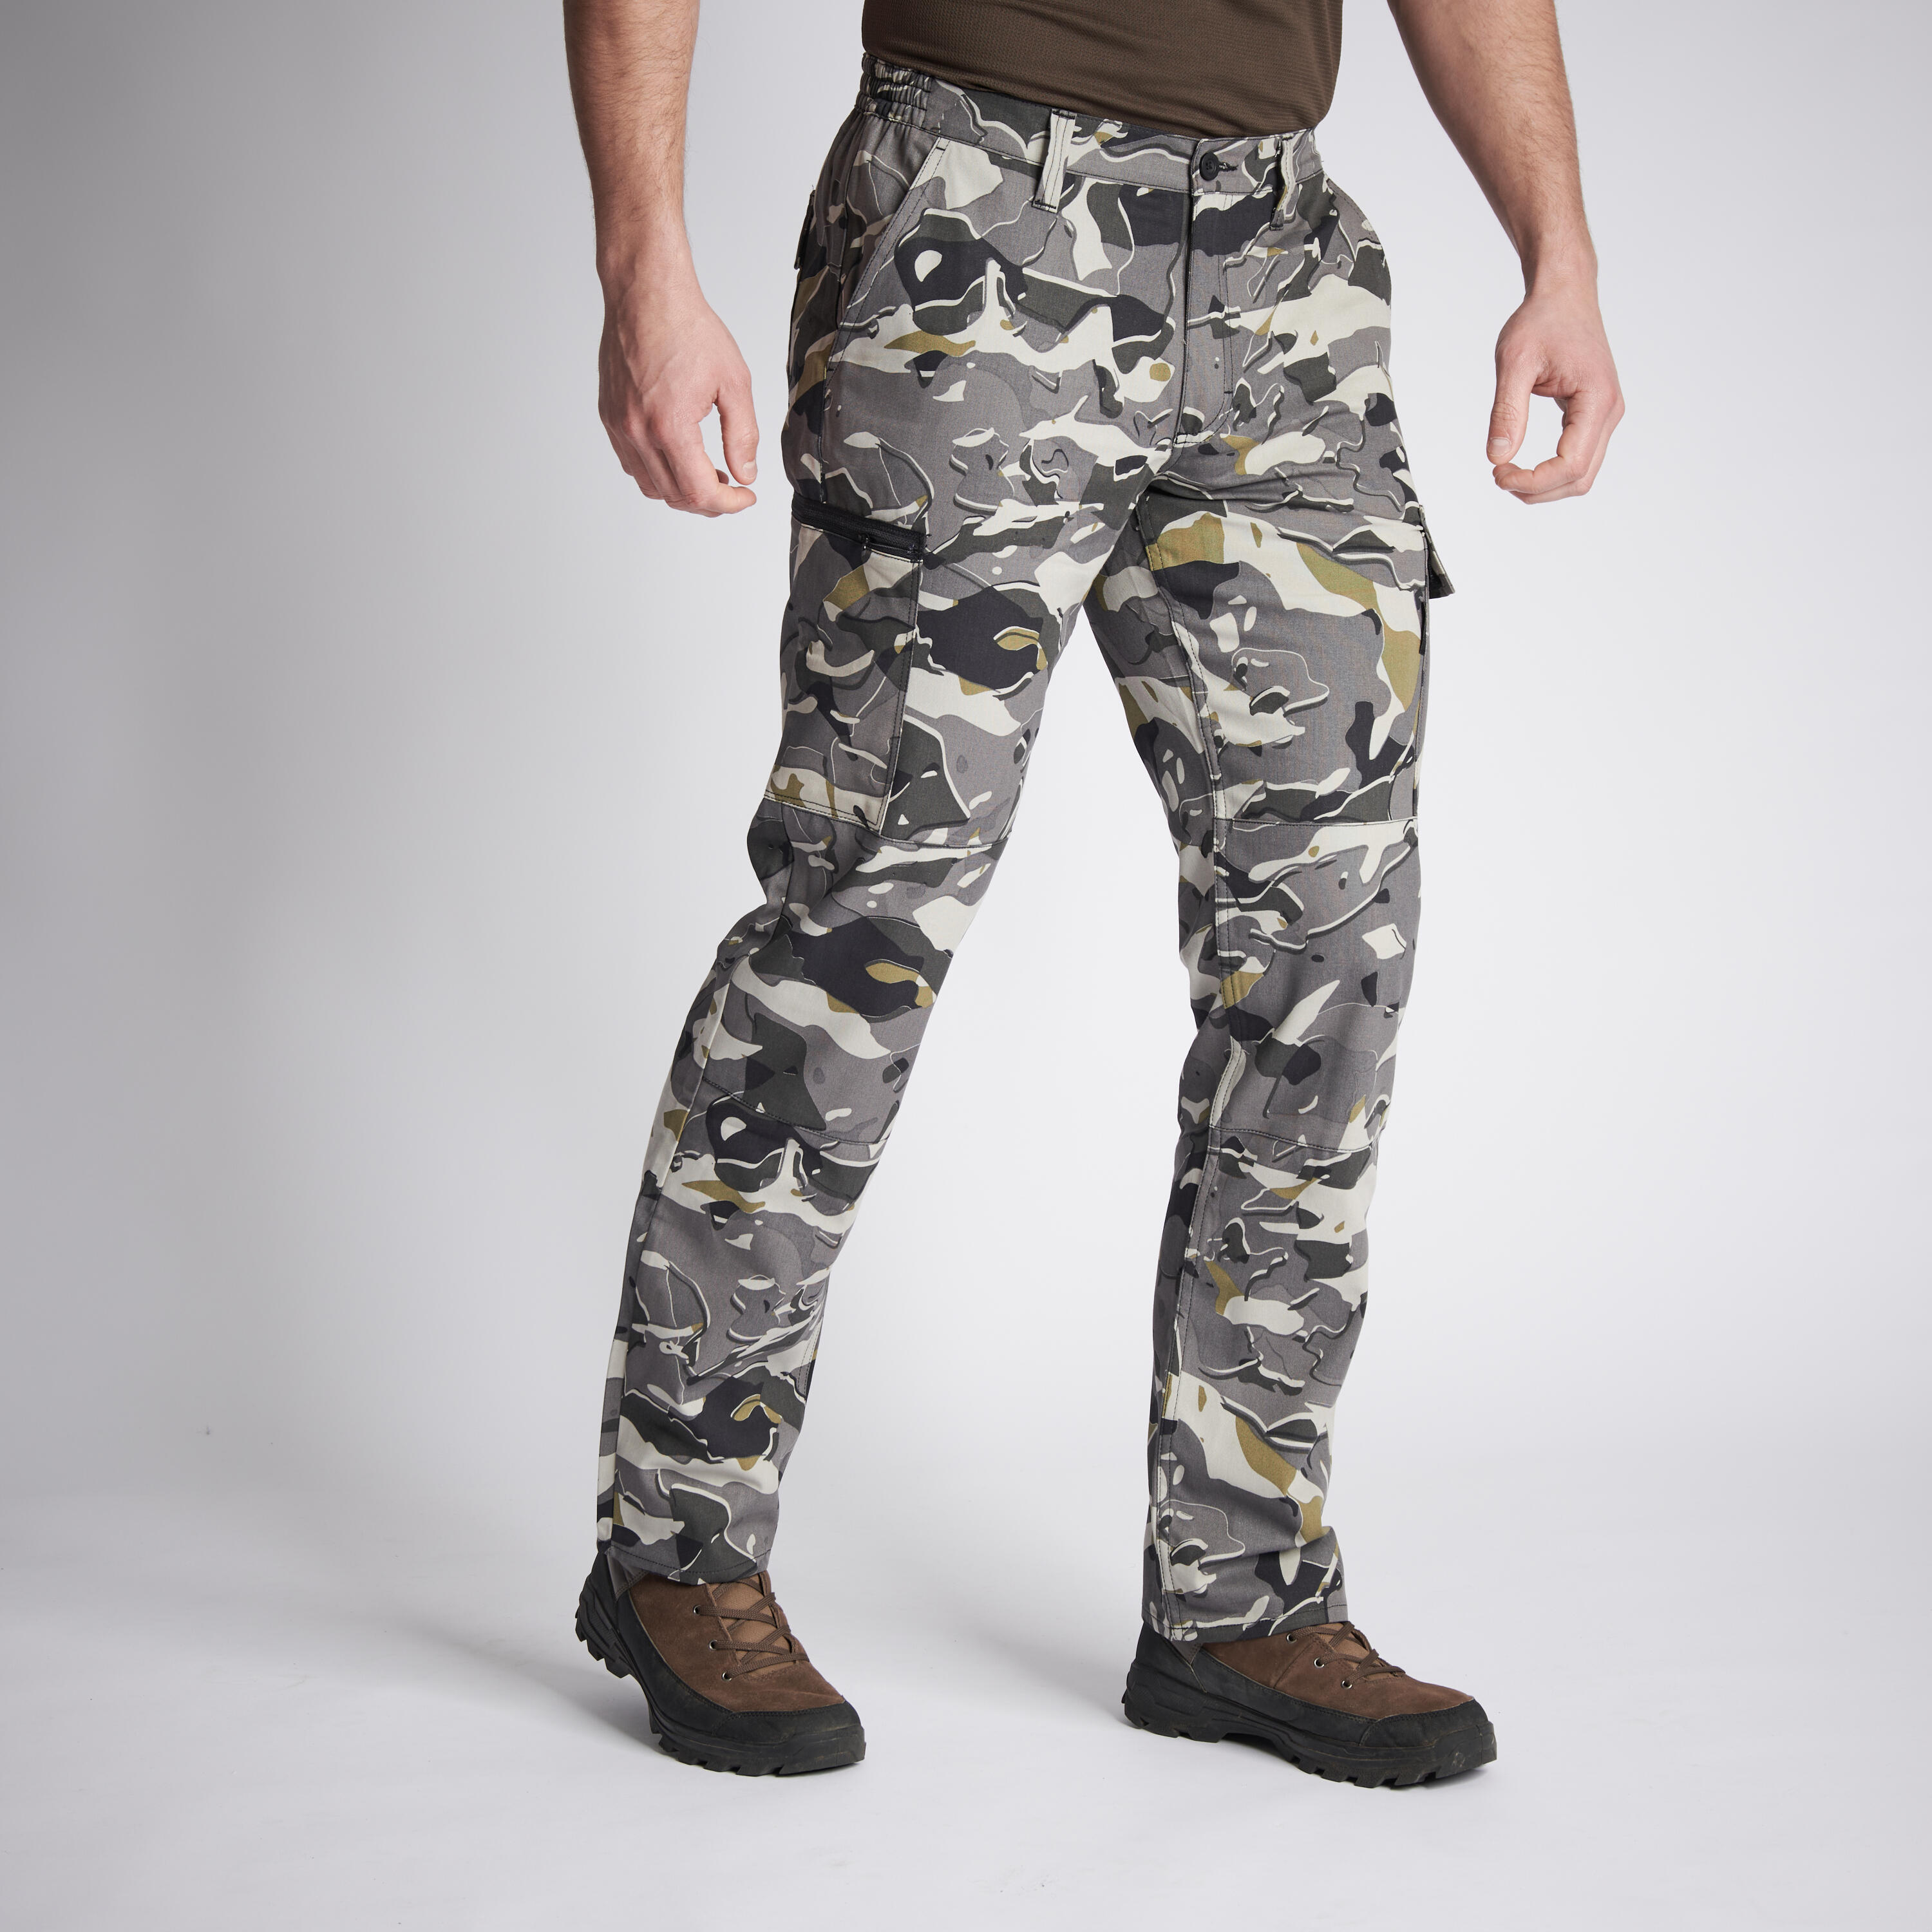 BUY ZIPPER FLY Military Camo Cargo Pants Men ON SALE NOW! - Rugged  Motorbike Jeans